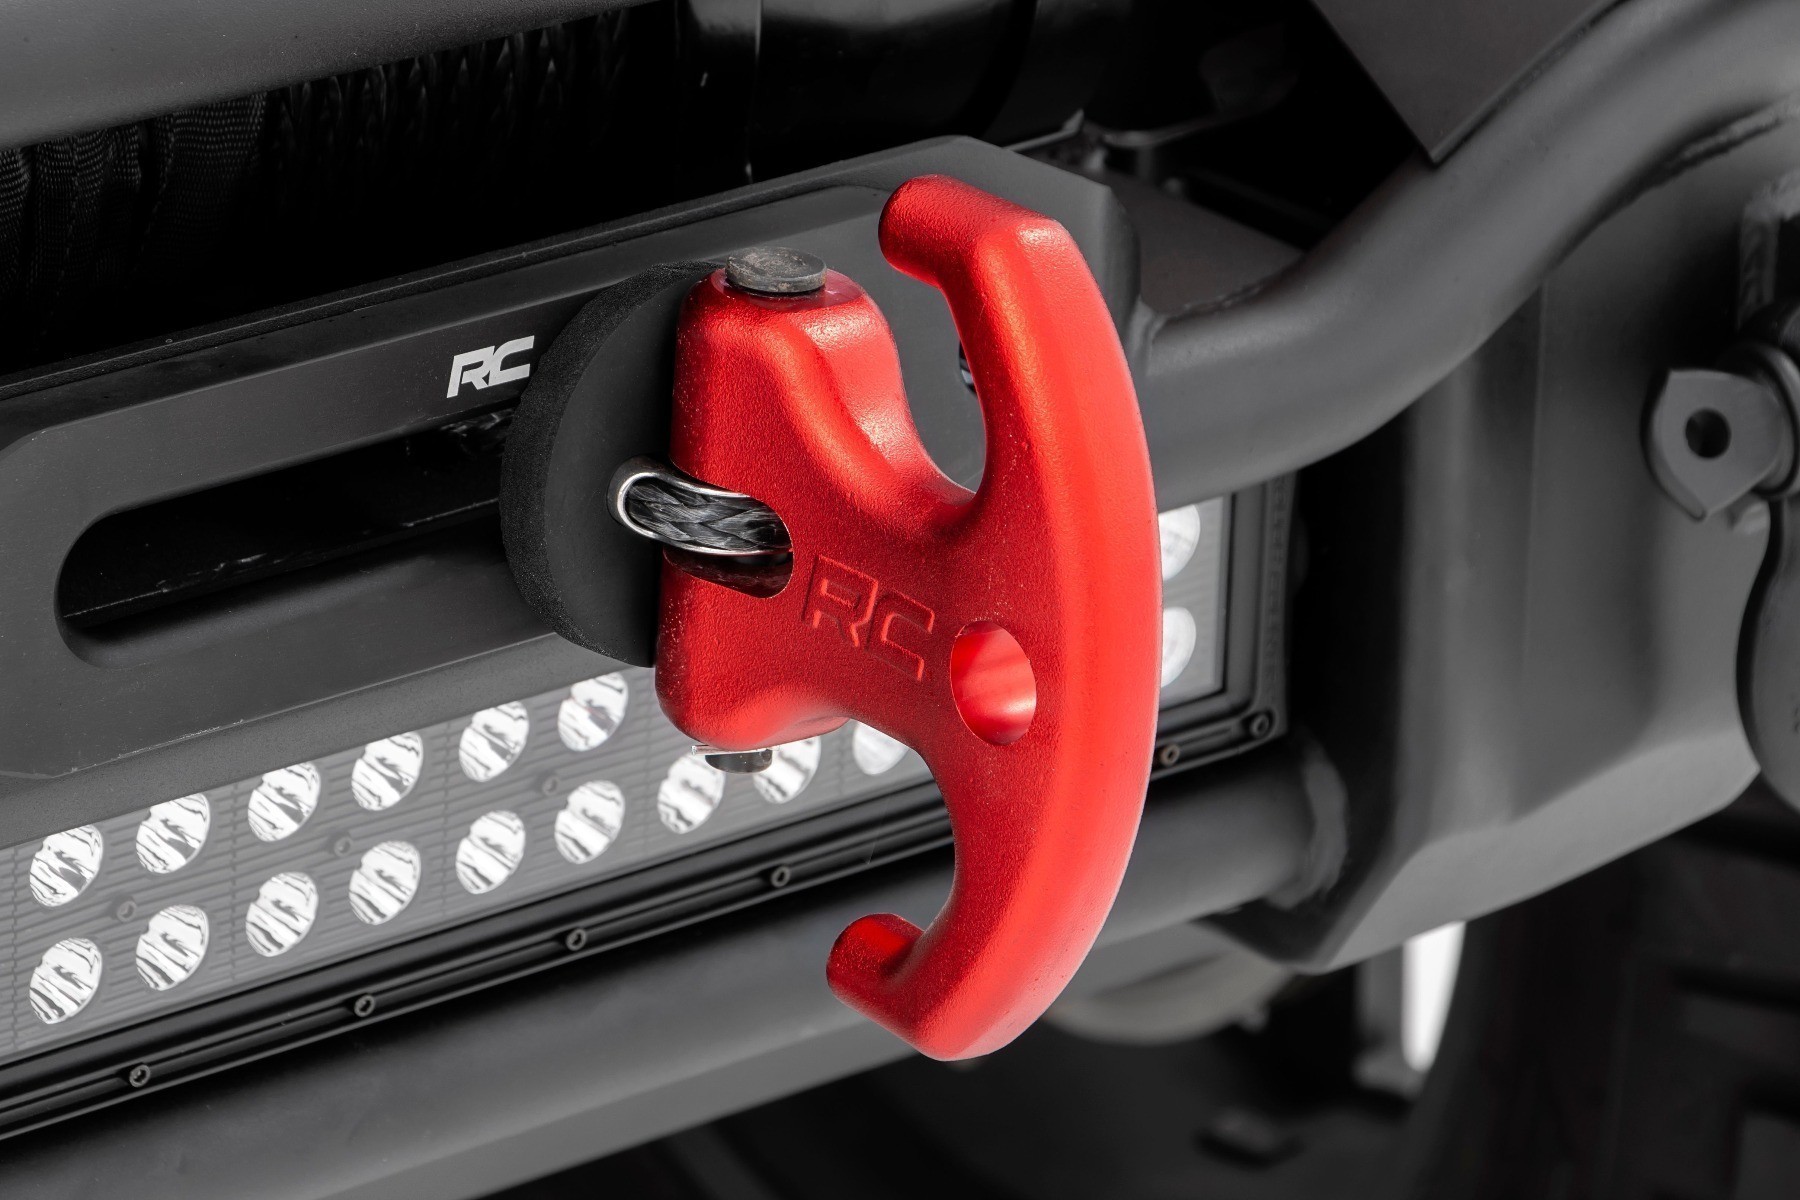 Winch Cleat (Red)